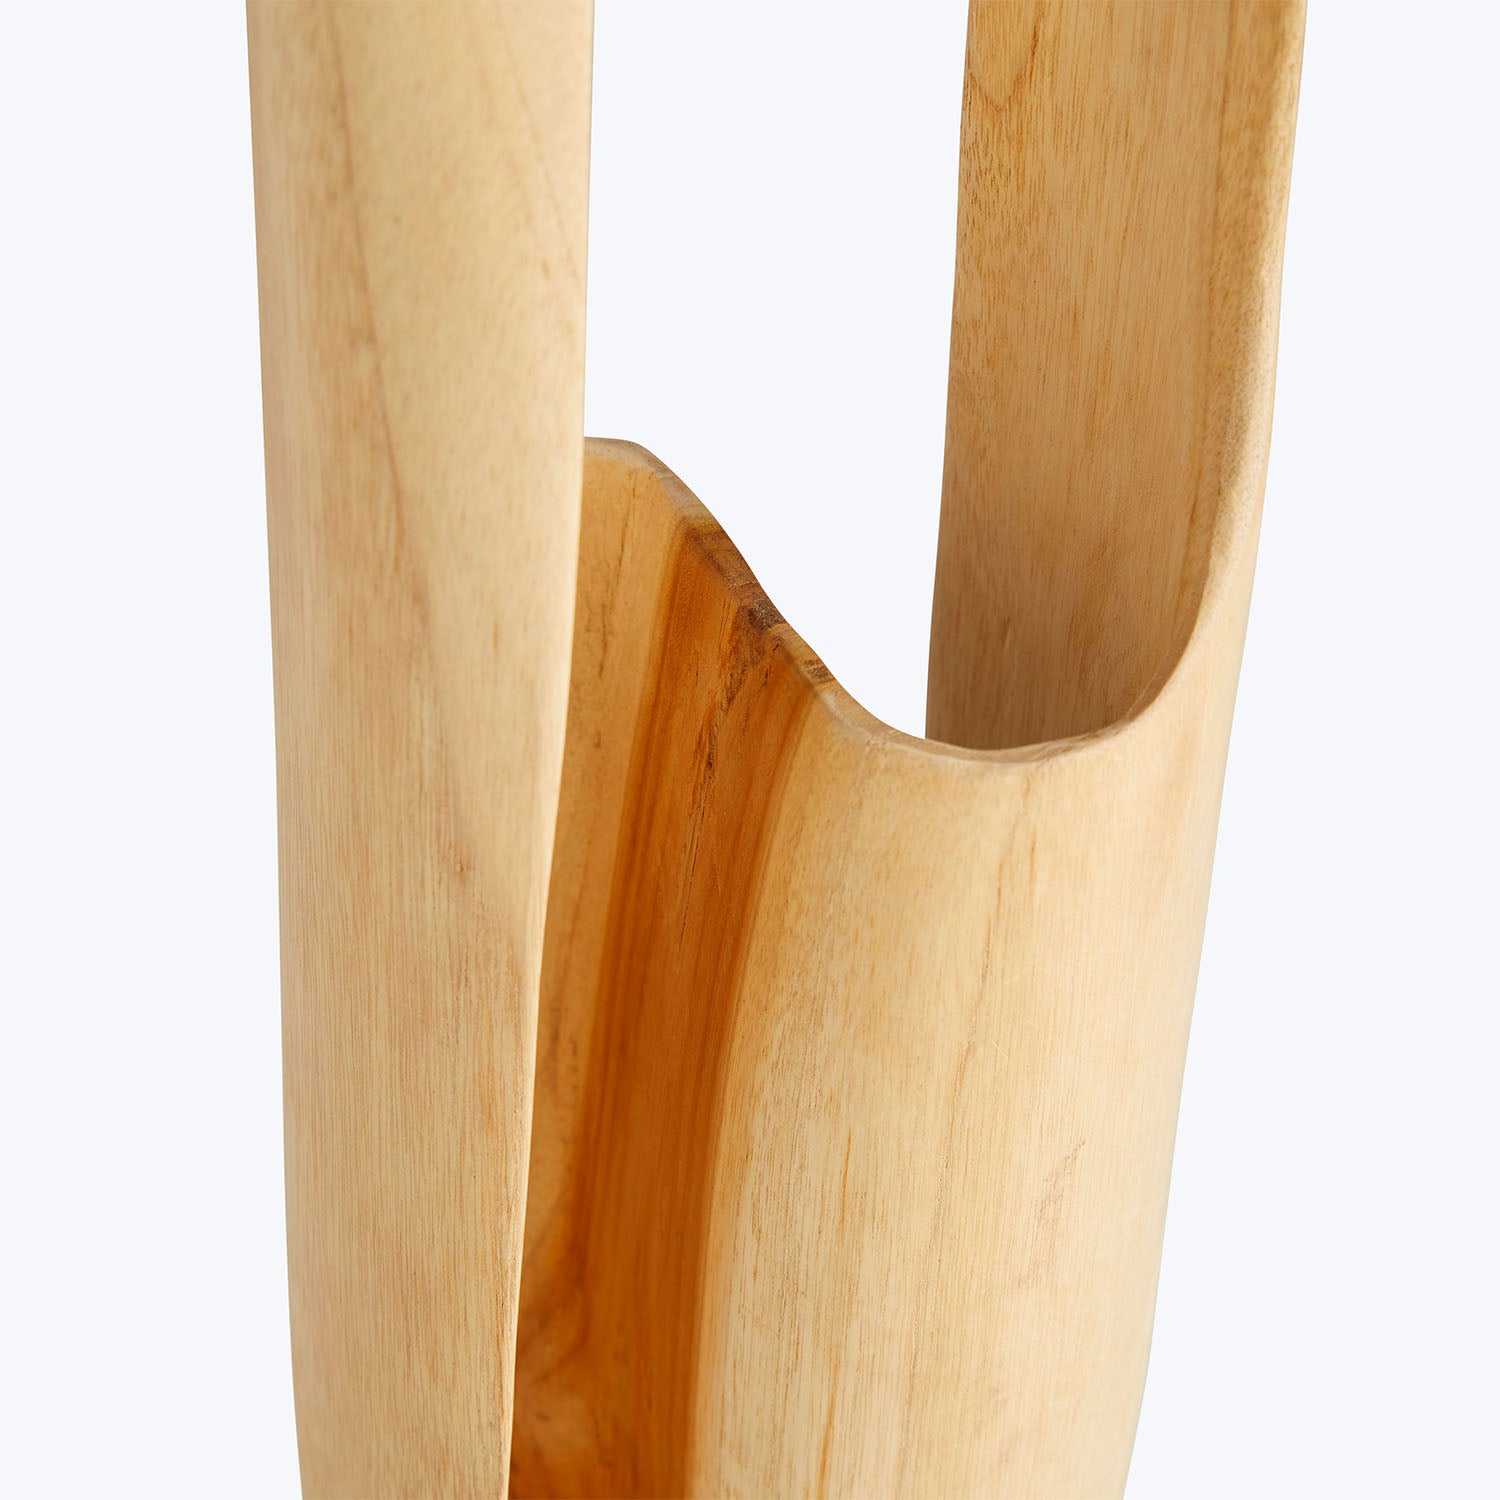 Close-up of a smooth, light-colored wooden object with curved handles.